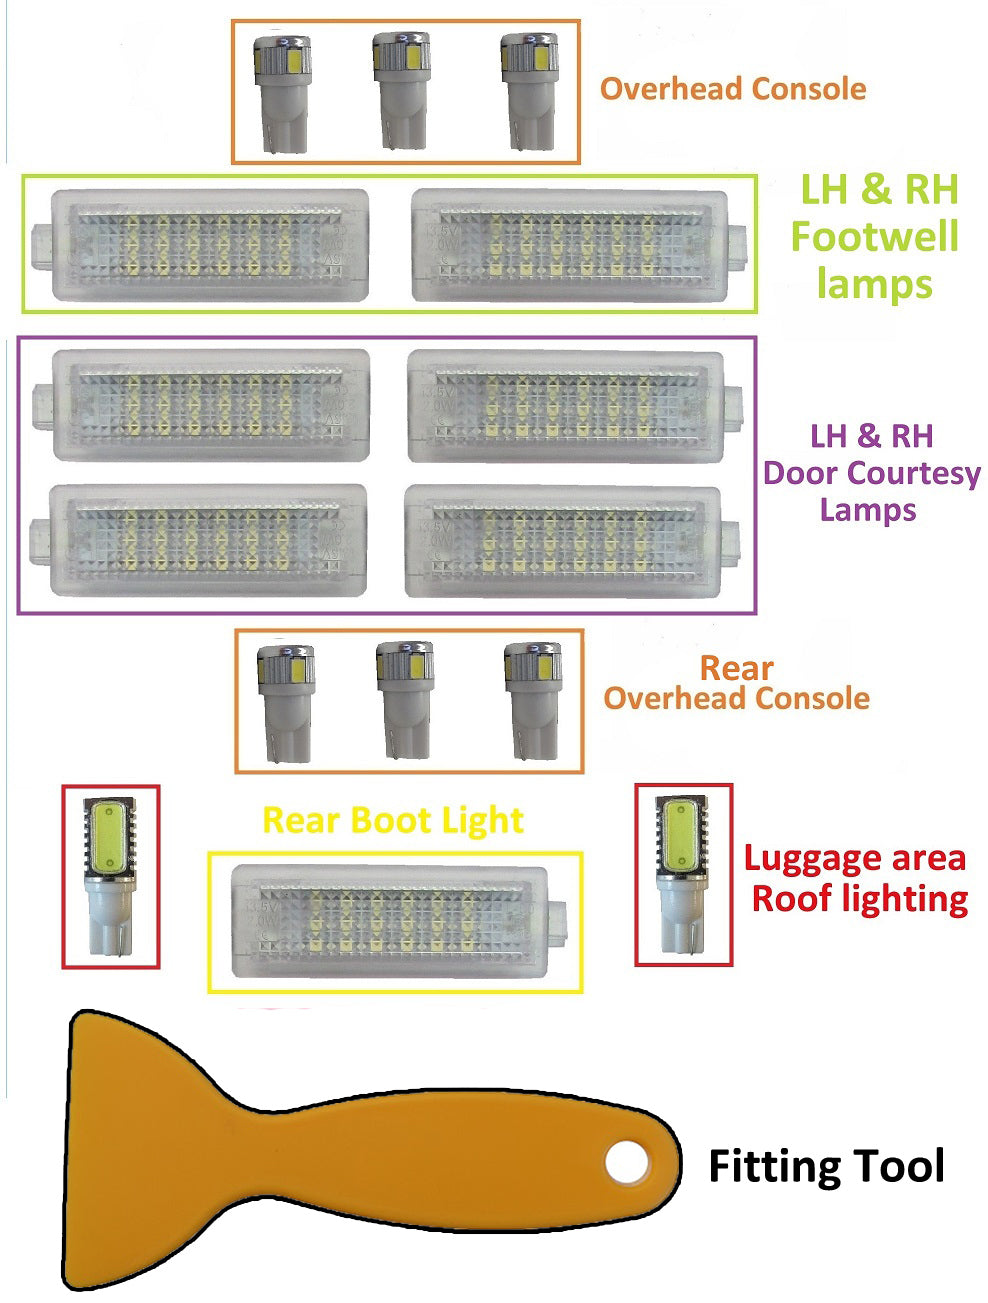 LED Interior Light Upgrade Kit - 16 pc - White - for Land Rover Discovery 3 & 4